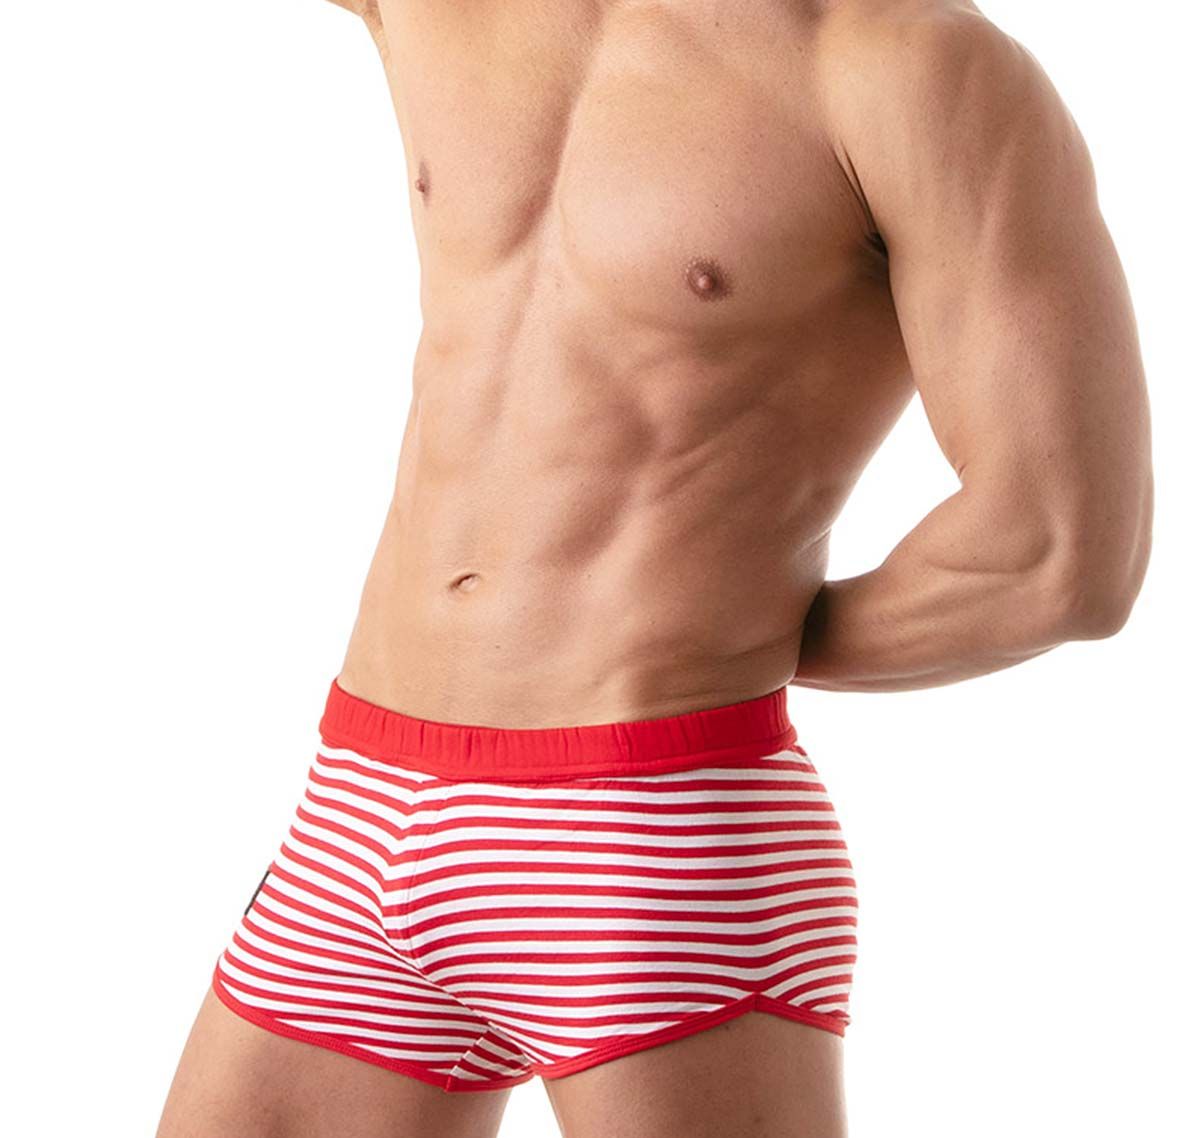 TOF Training shorts SAILOR MINI-SHORTS RED TOF226R, red